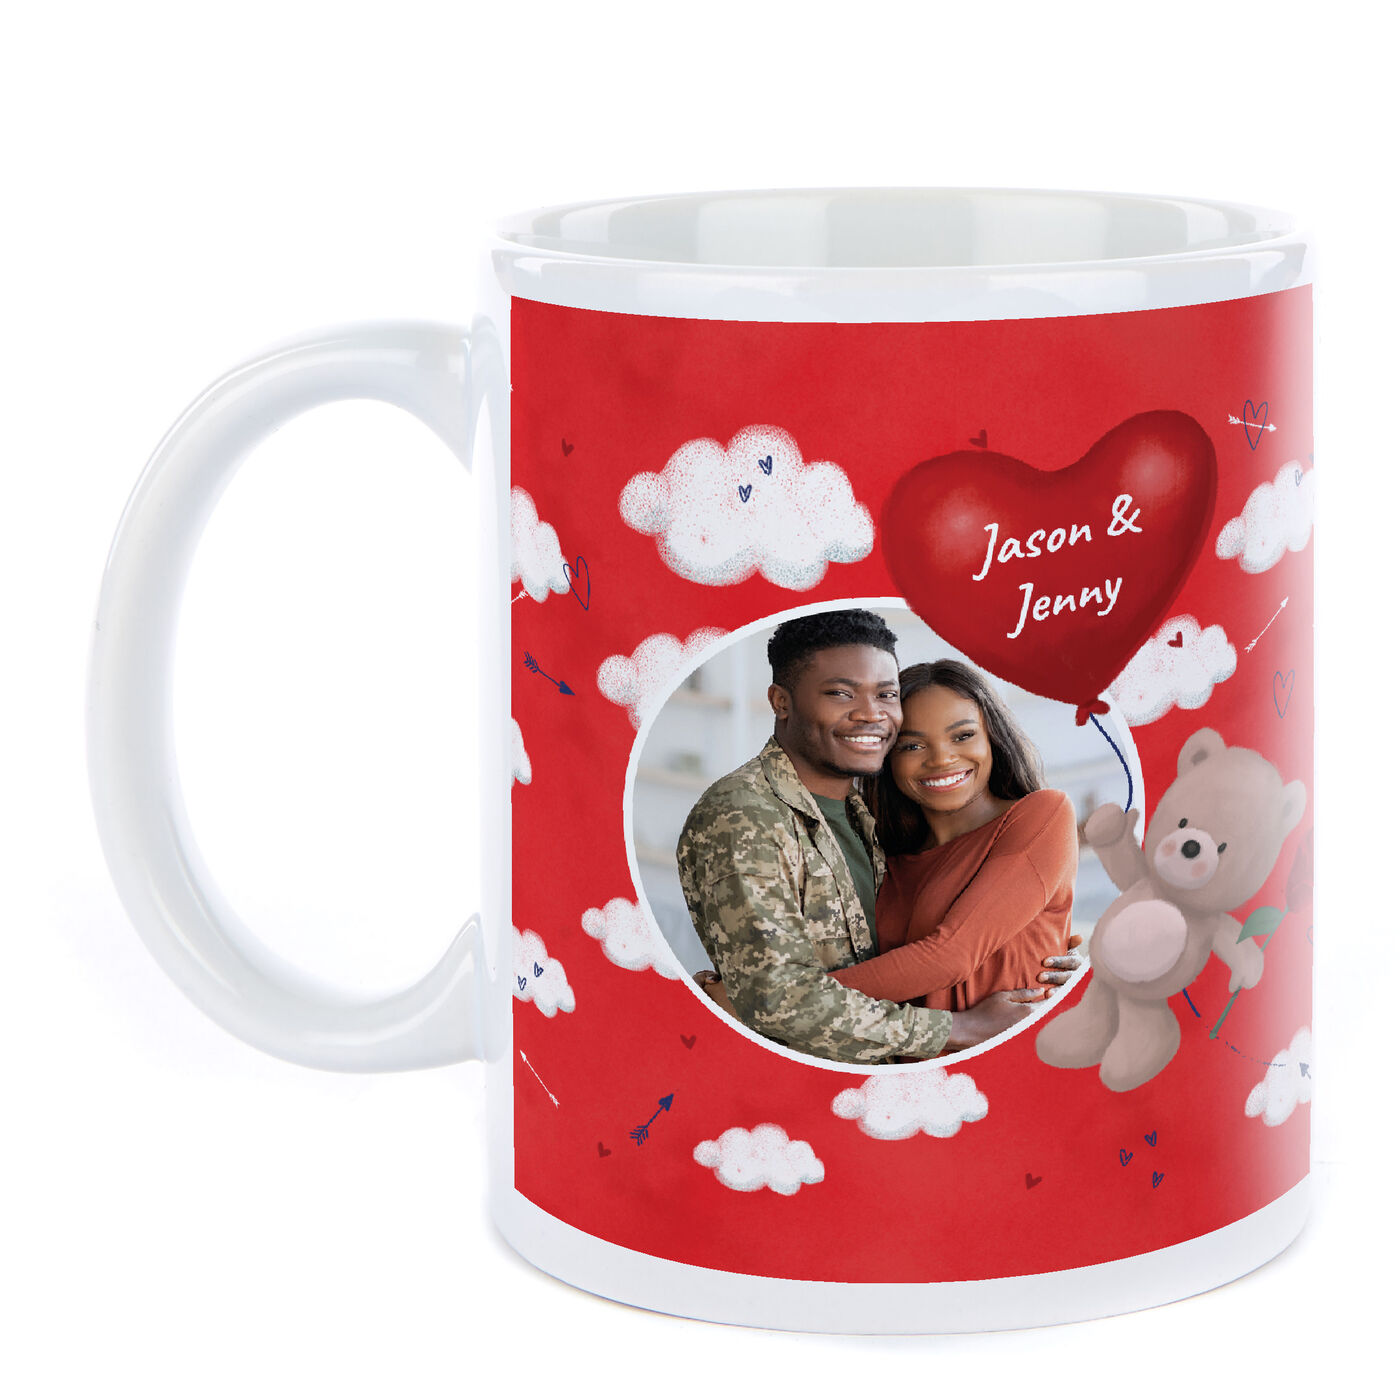 Buy Photo Mug Hugs Love Is In The Air For Gbp 999 Card Factory Uk 4913